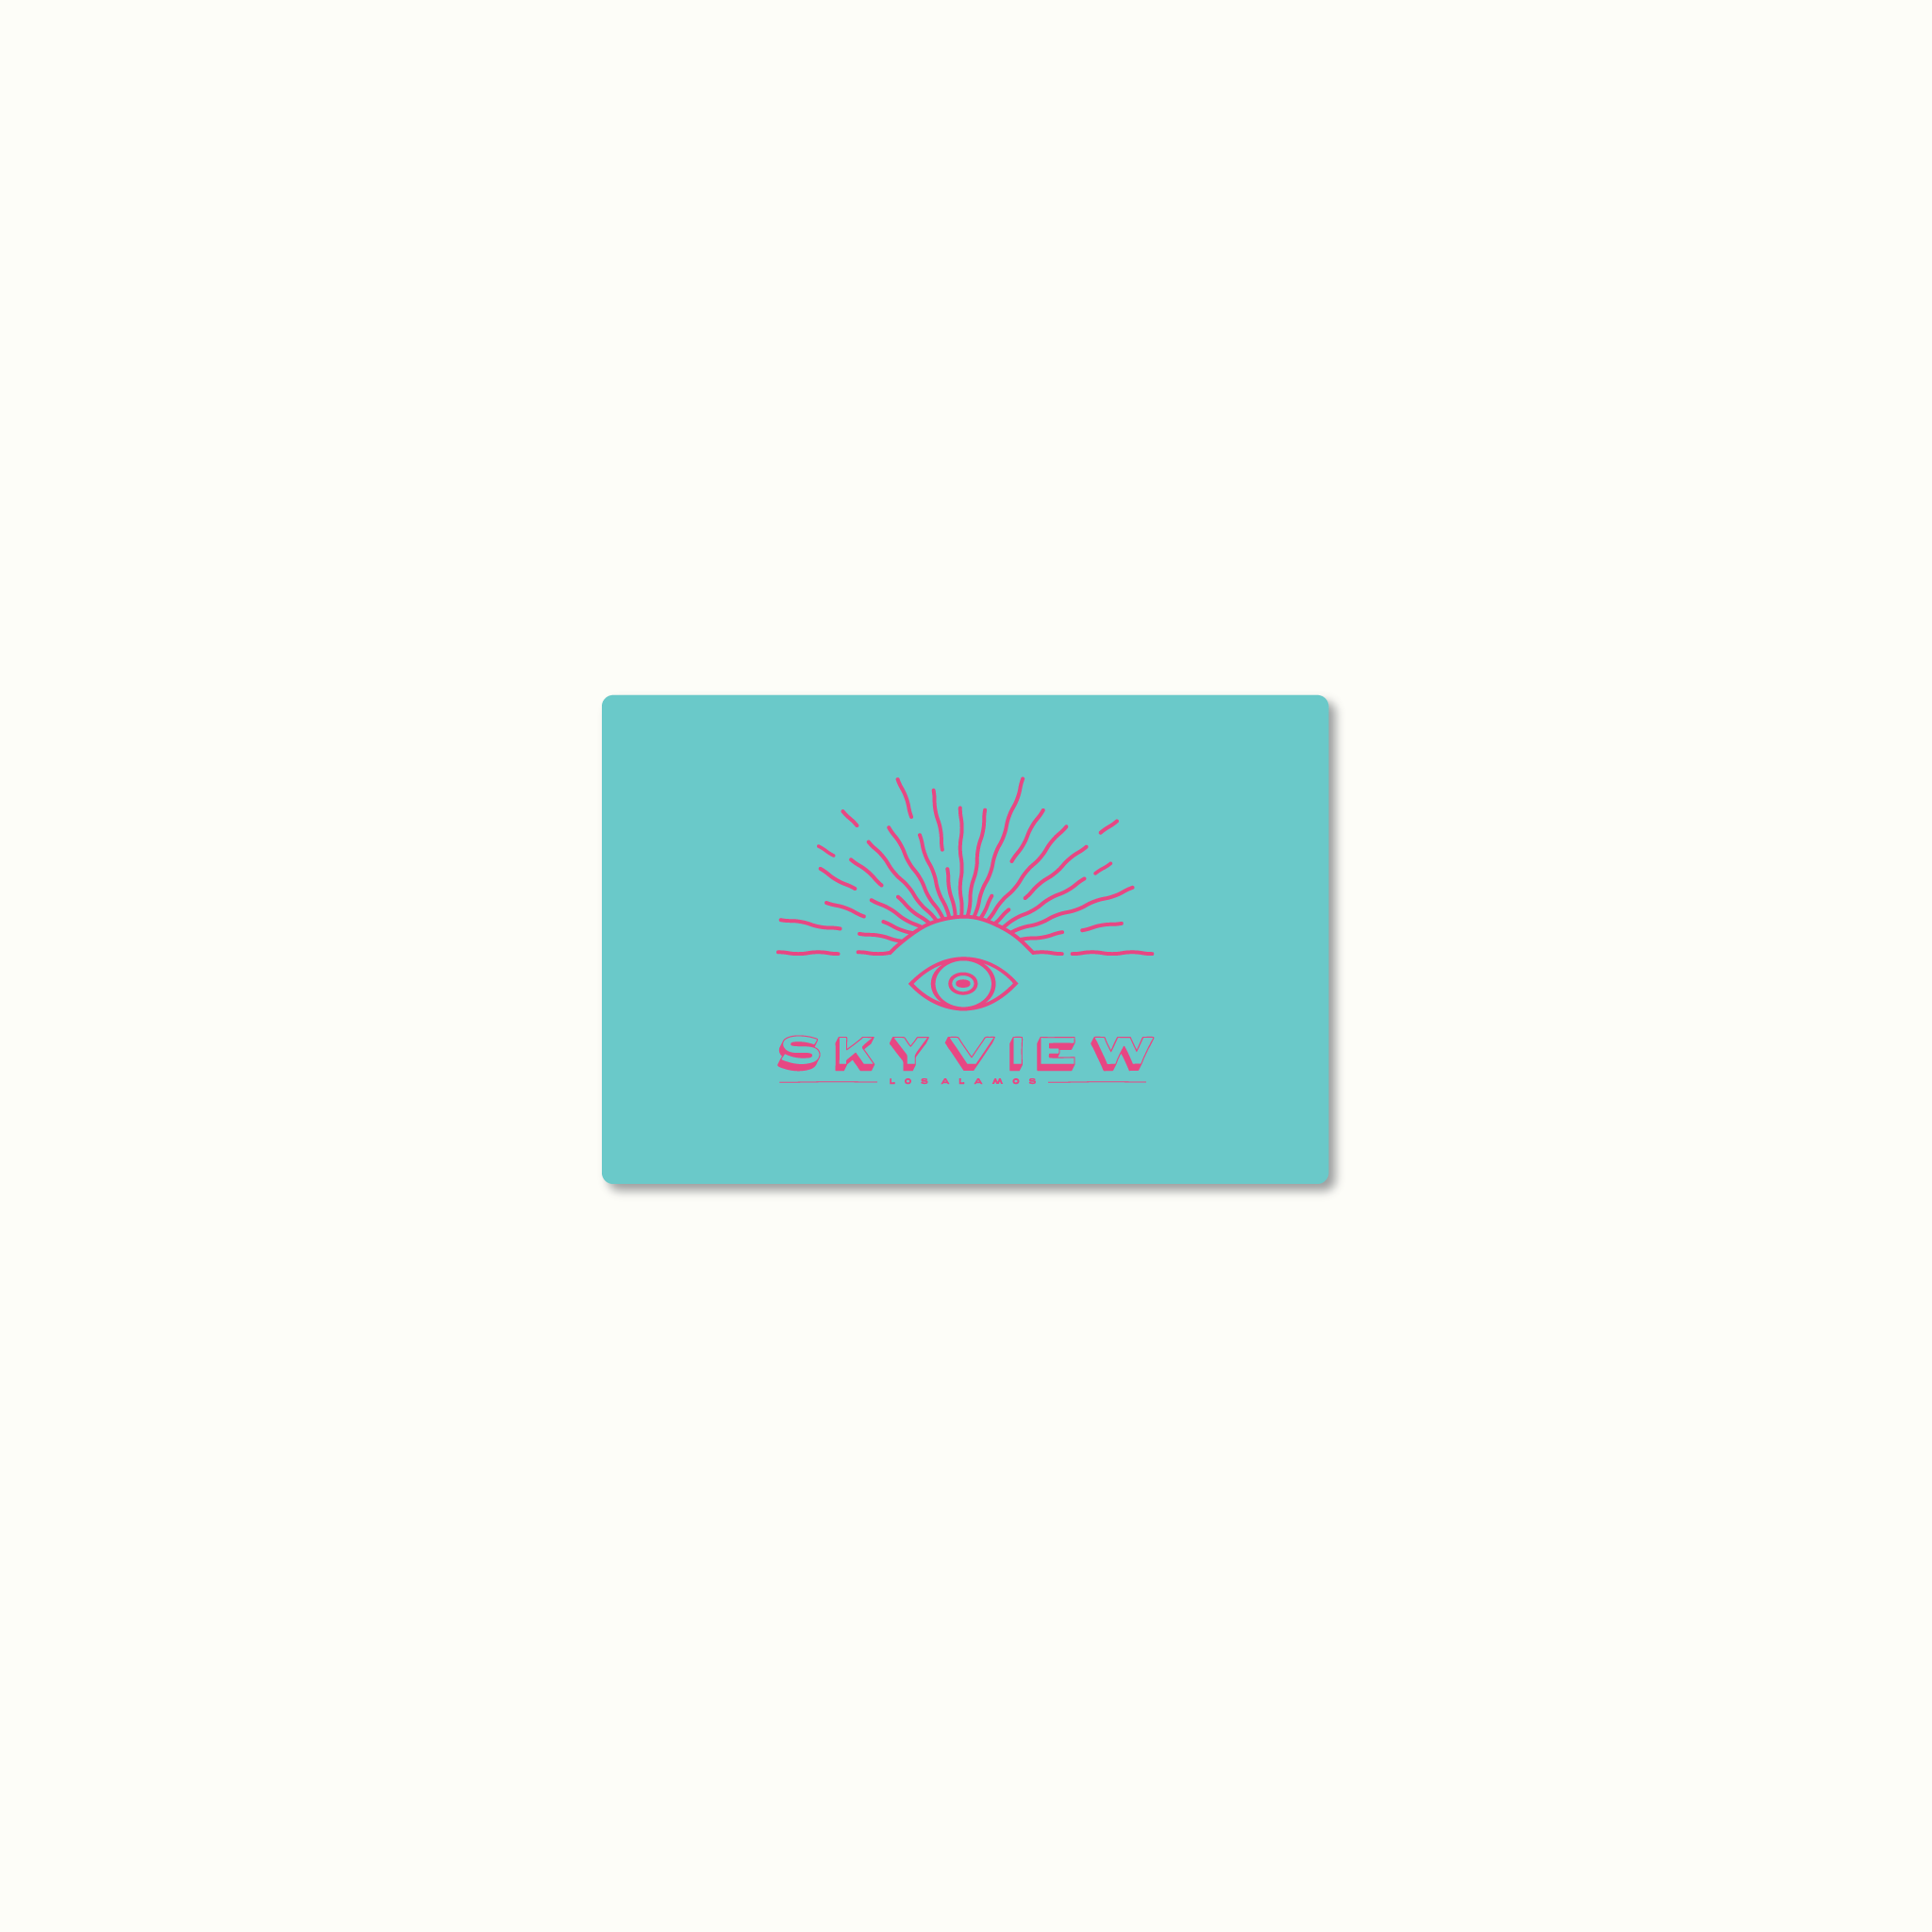 Skyview Gift Card for Skyview Los Alamos by Nomada Deco